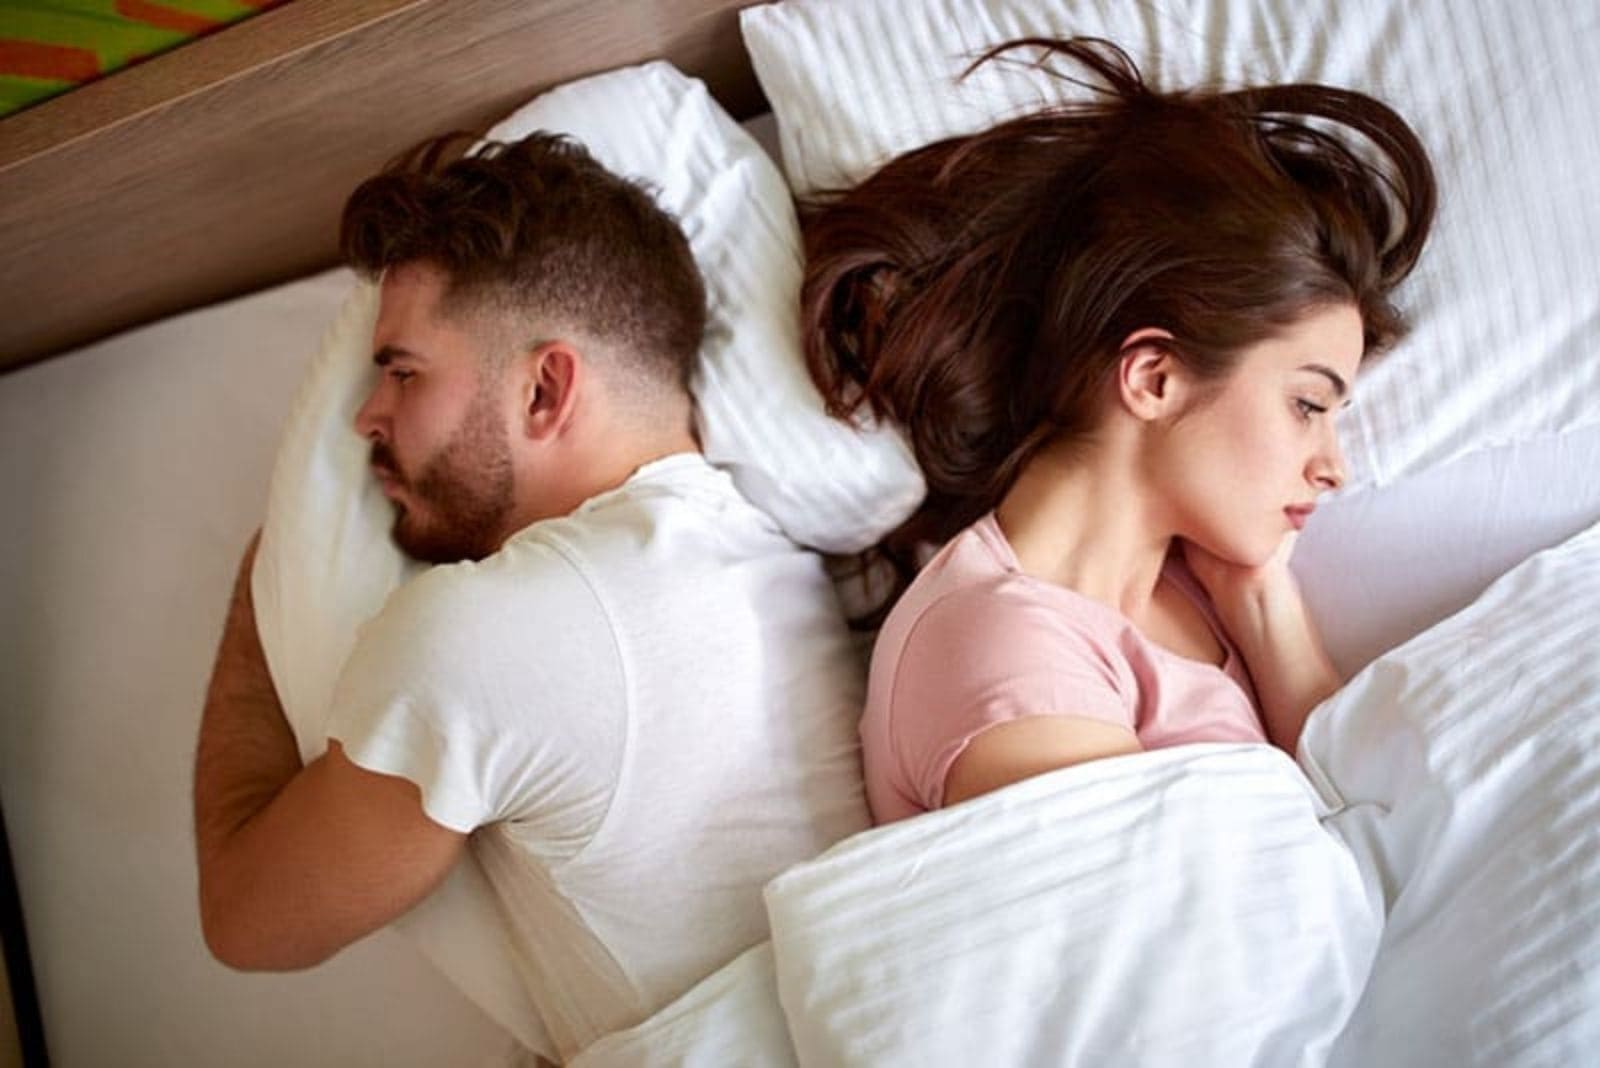 the man and woman lie on the bed with their backs to each other